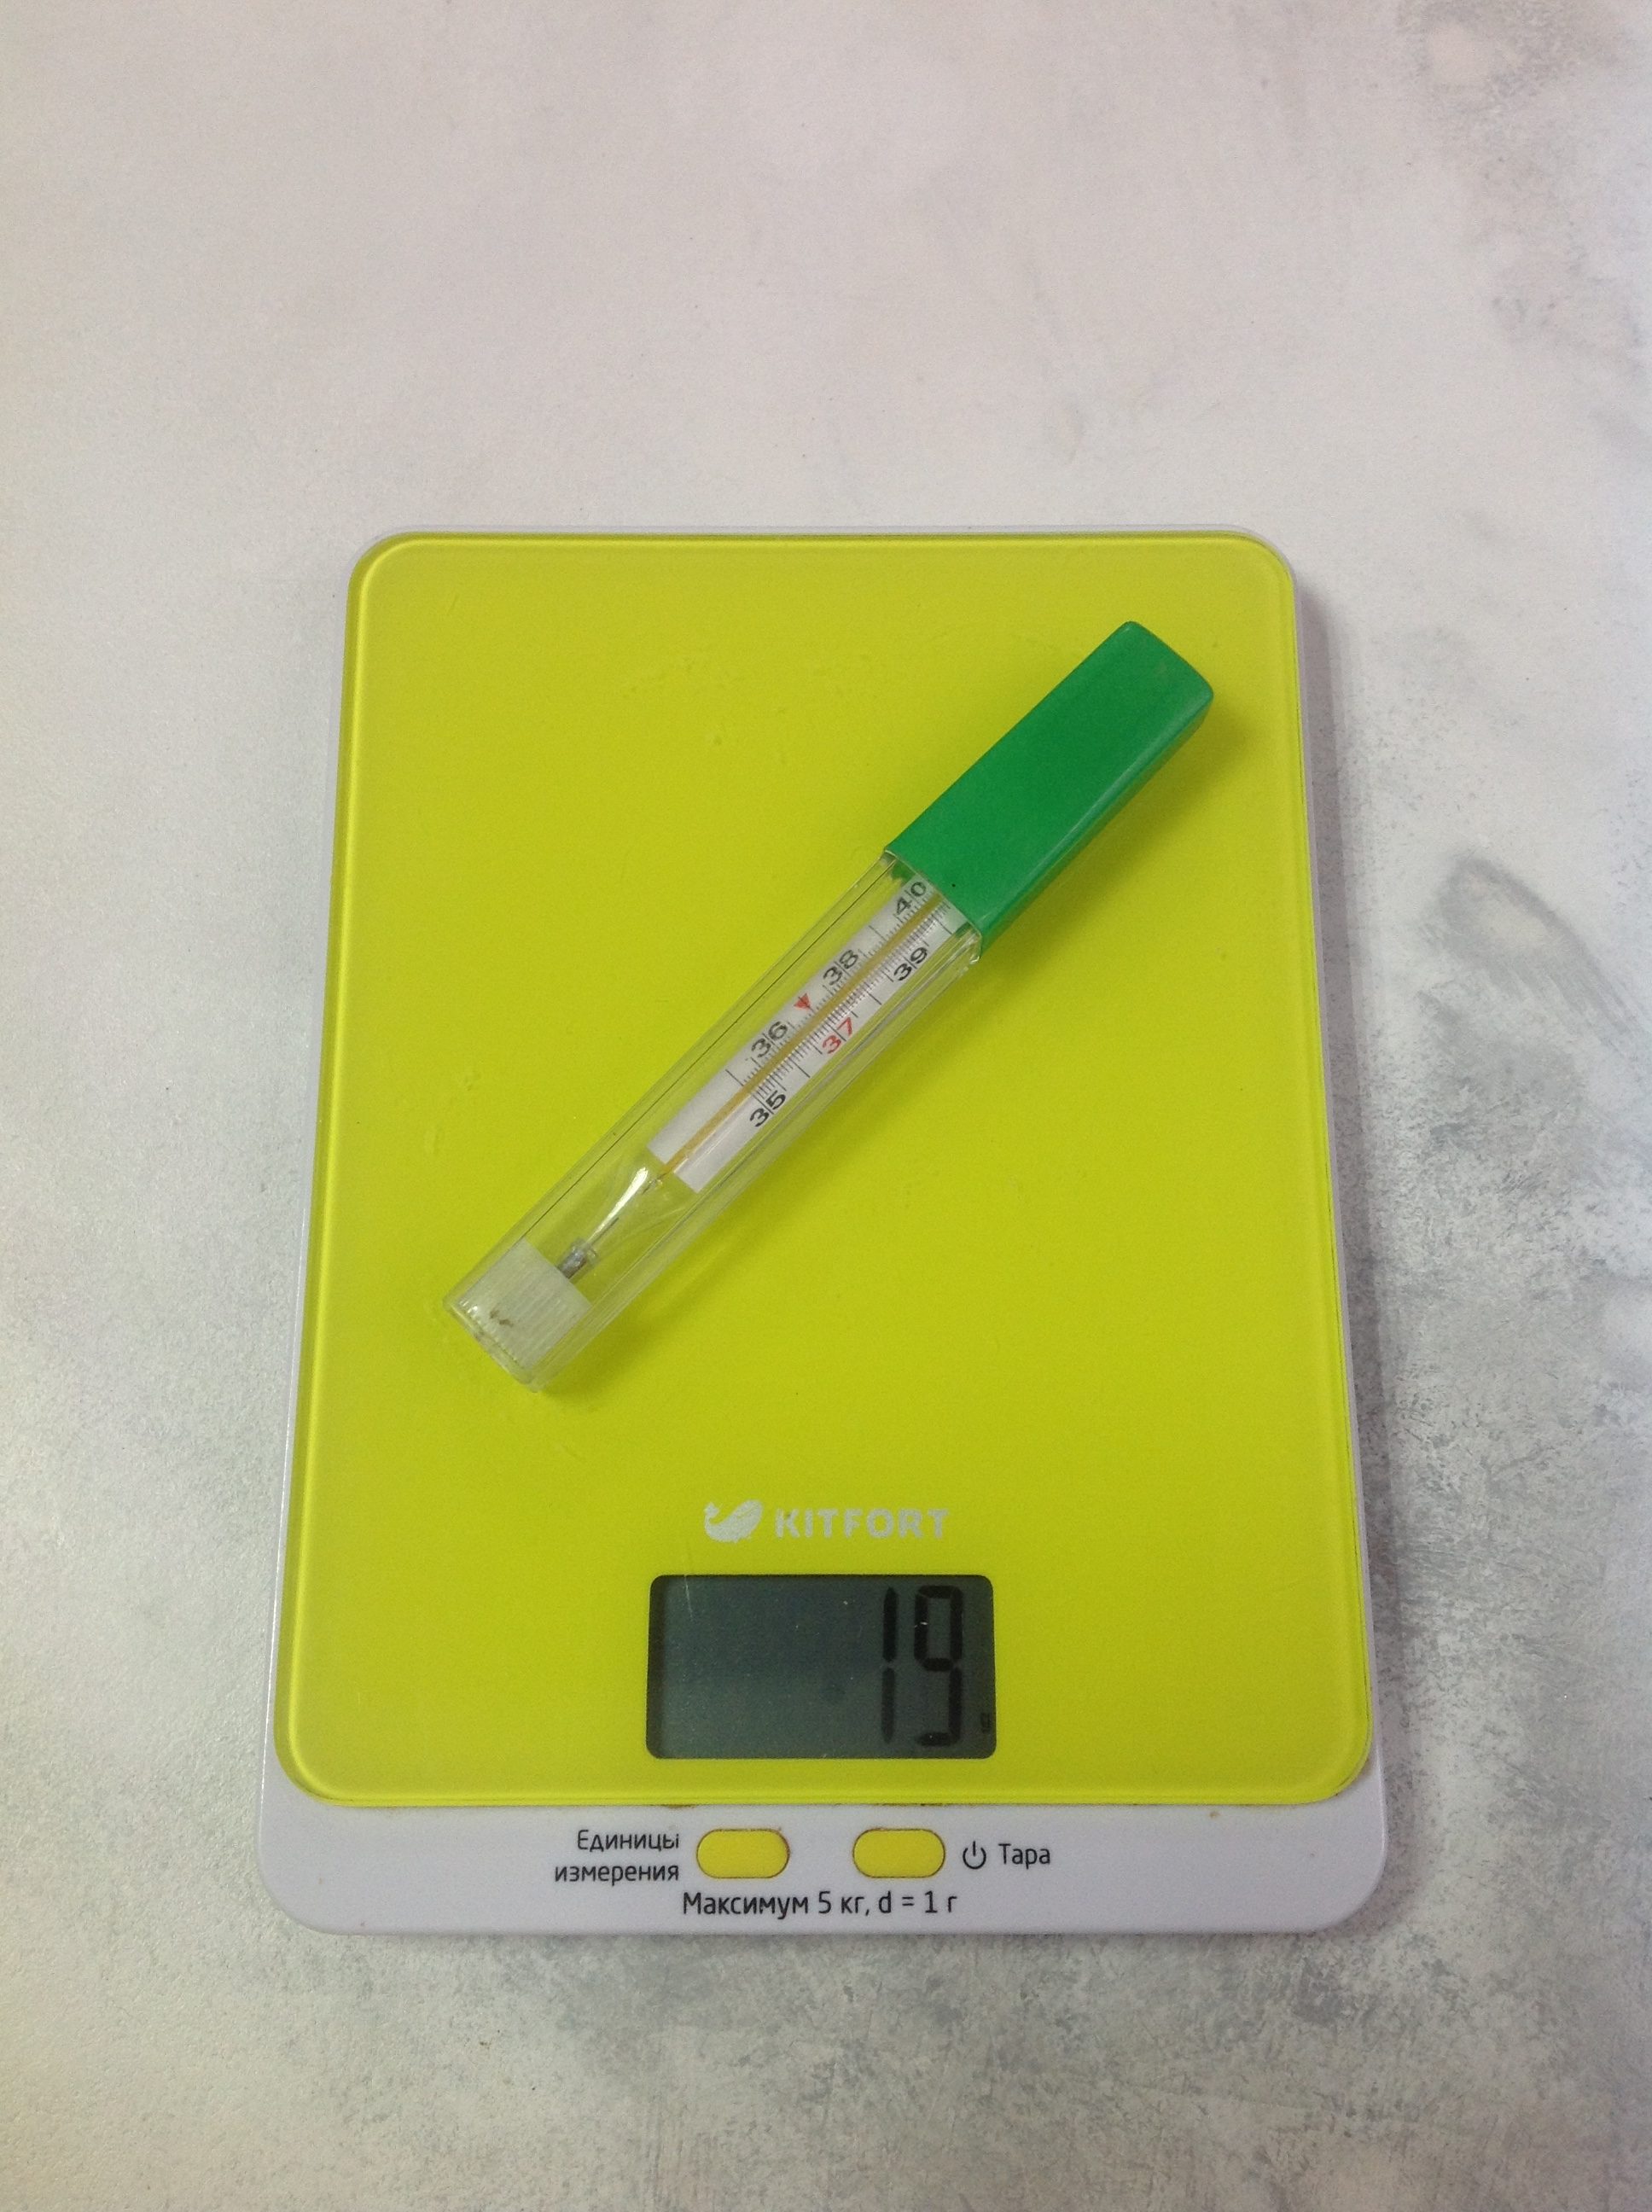 weight of a mercury thermometer (thermometer) in a holder